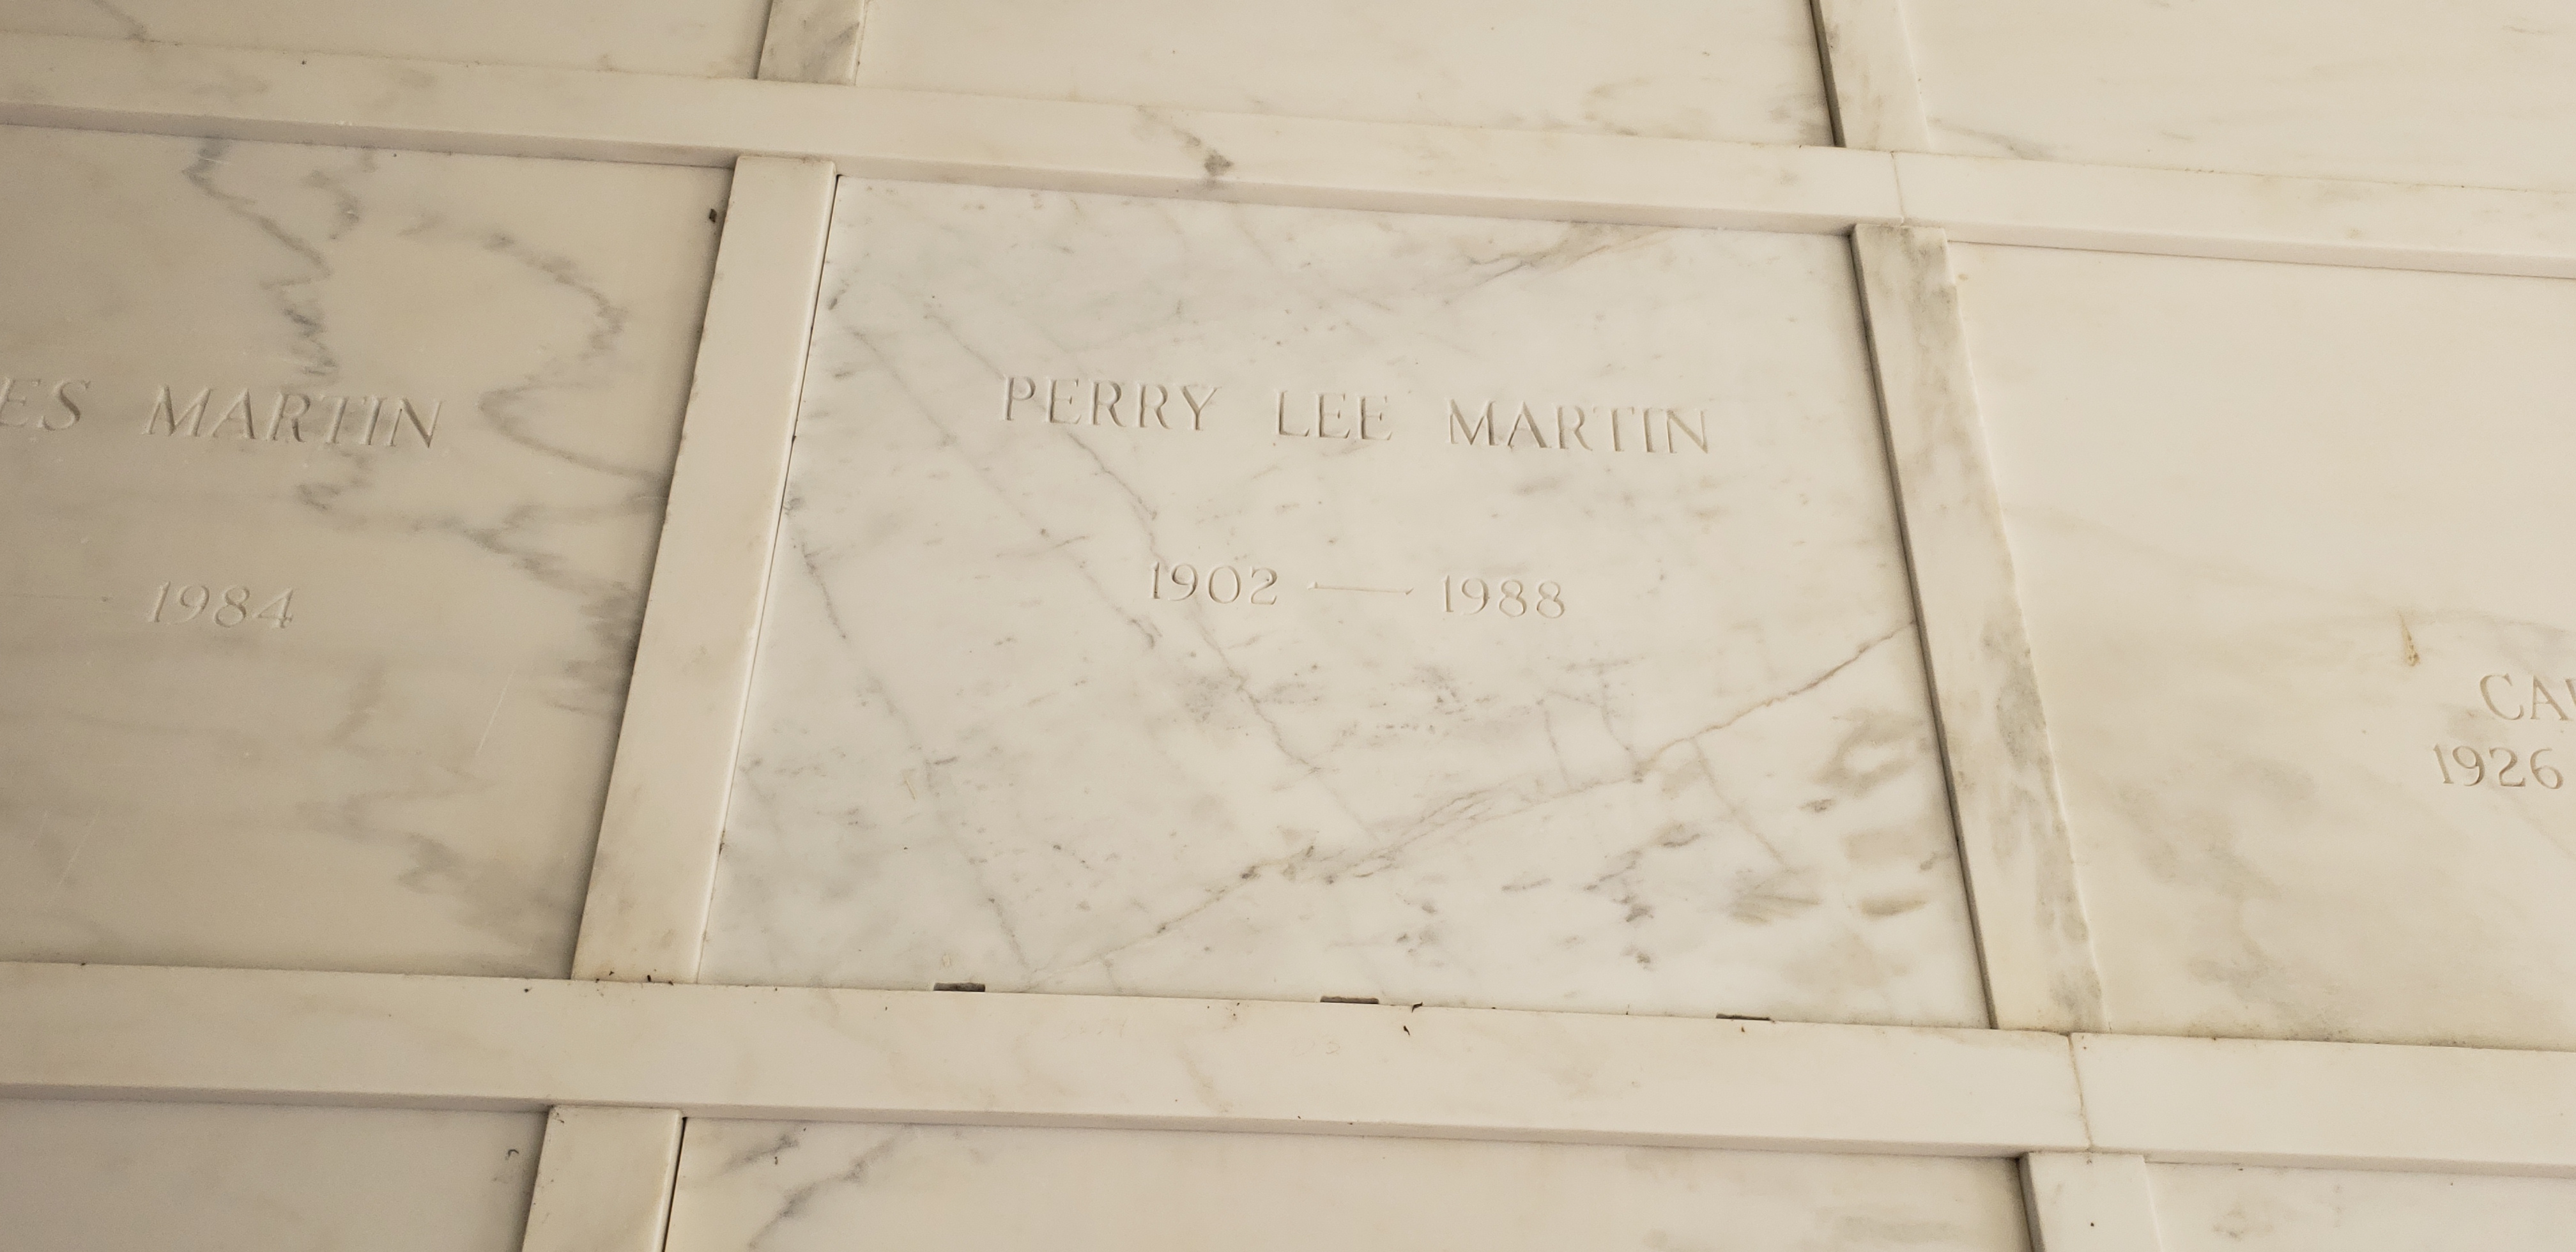 Perry Lee Martin